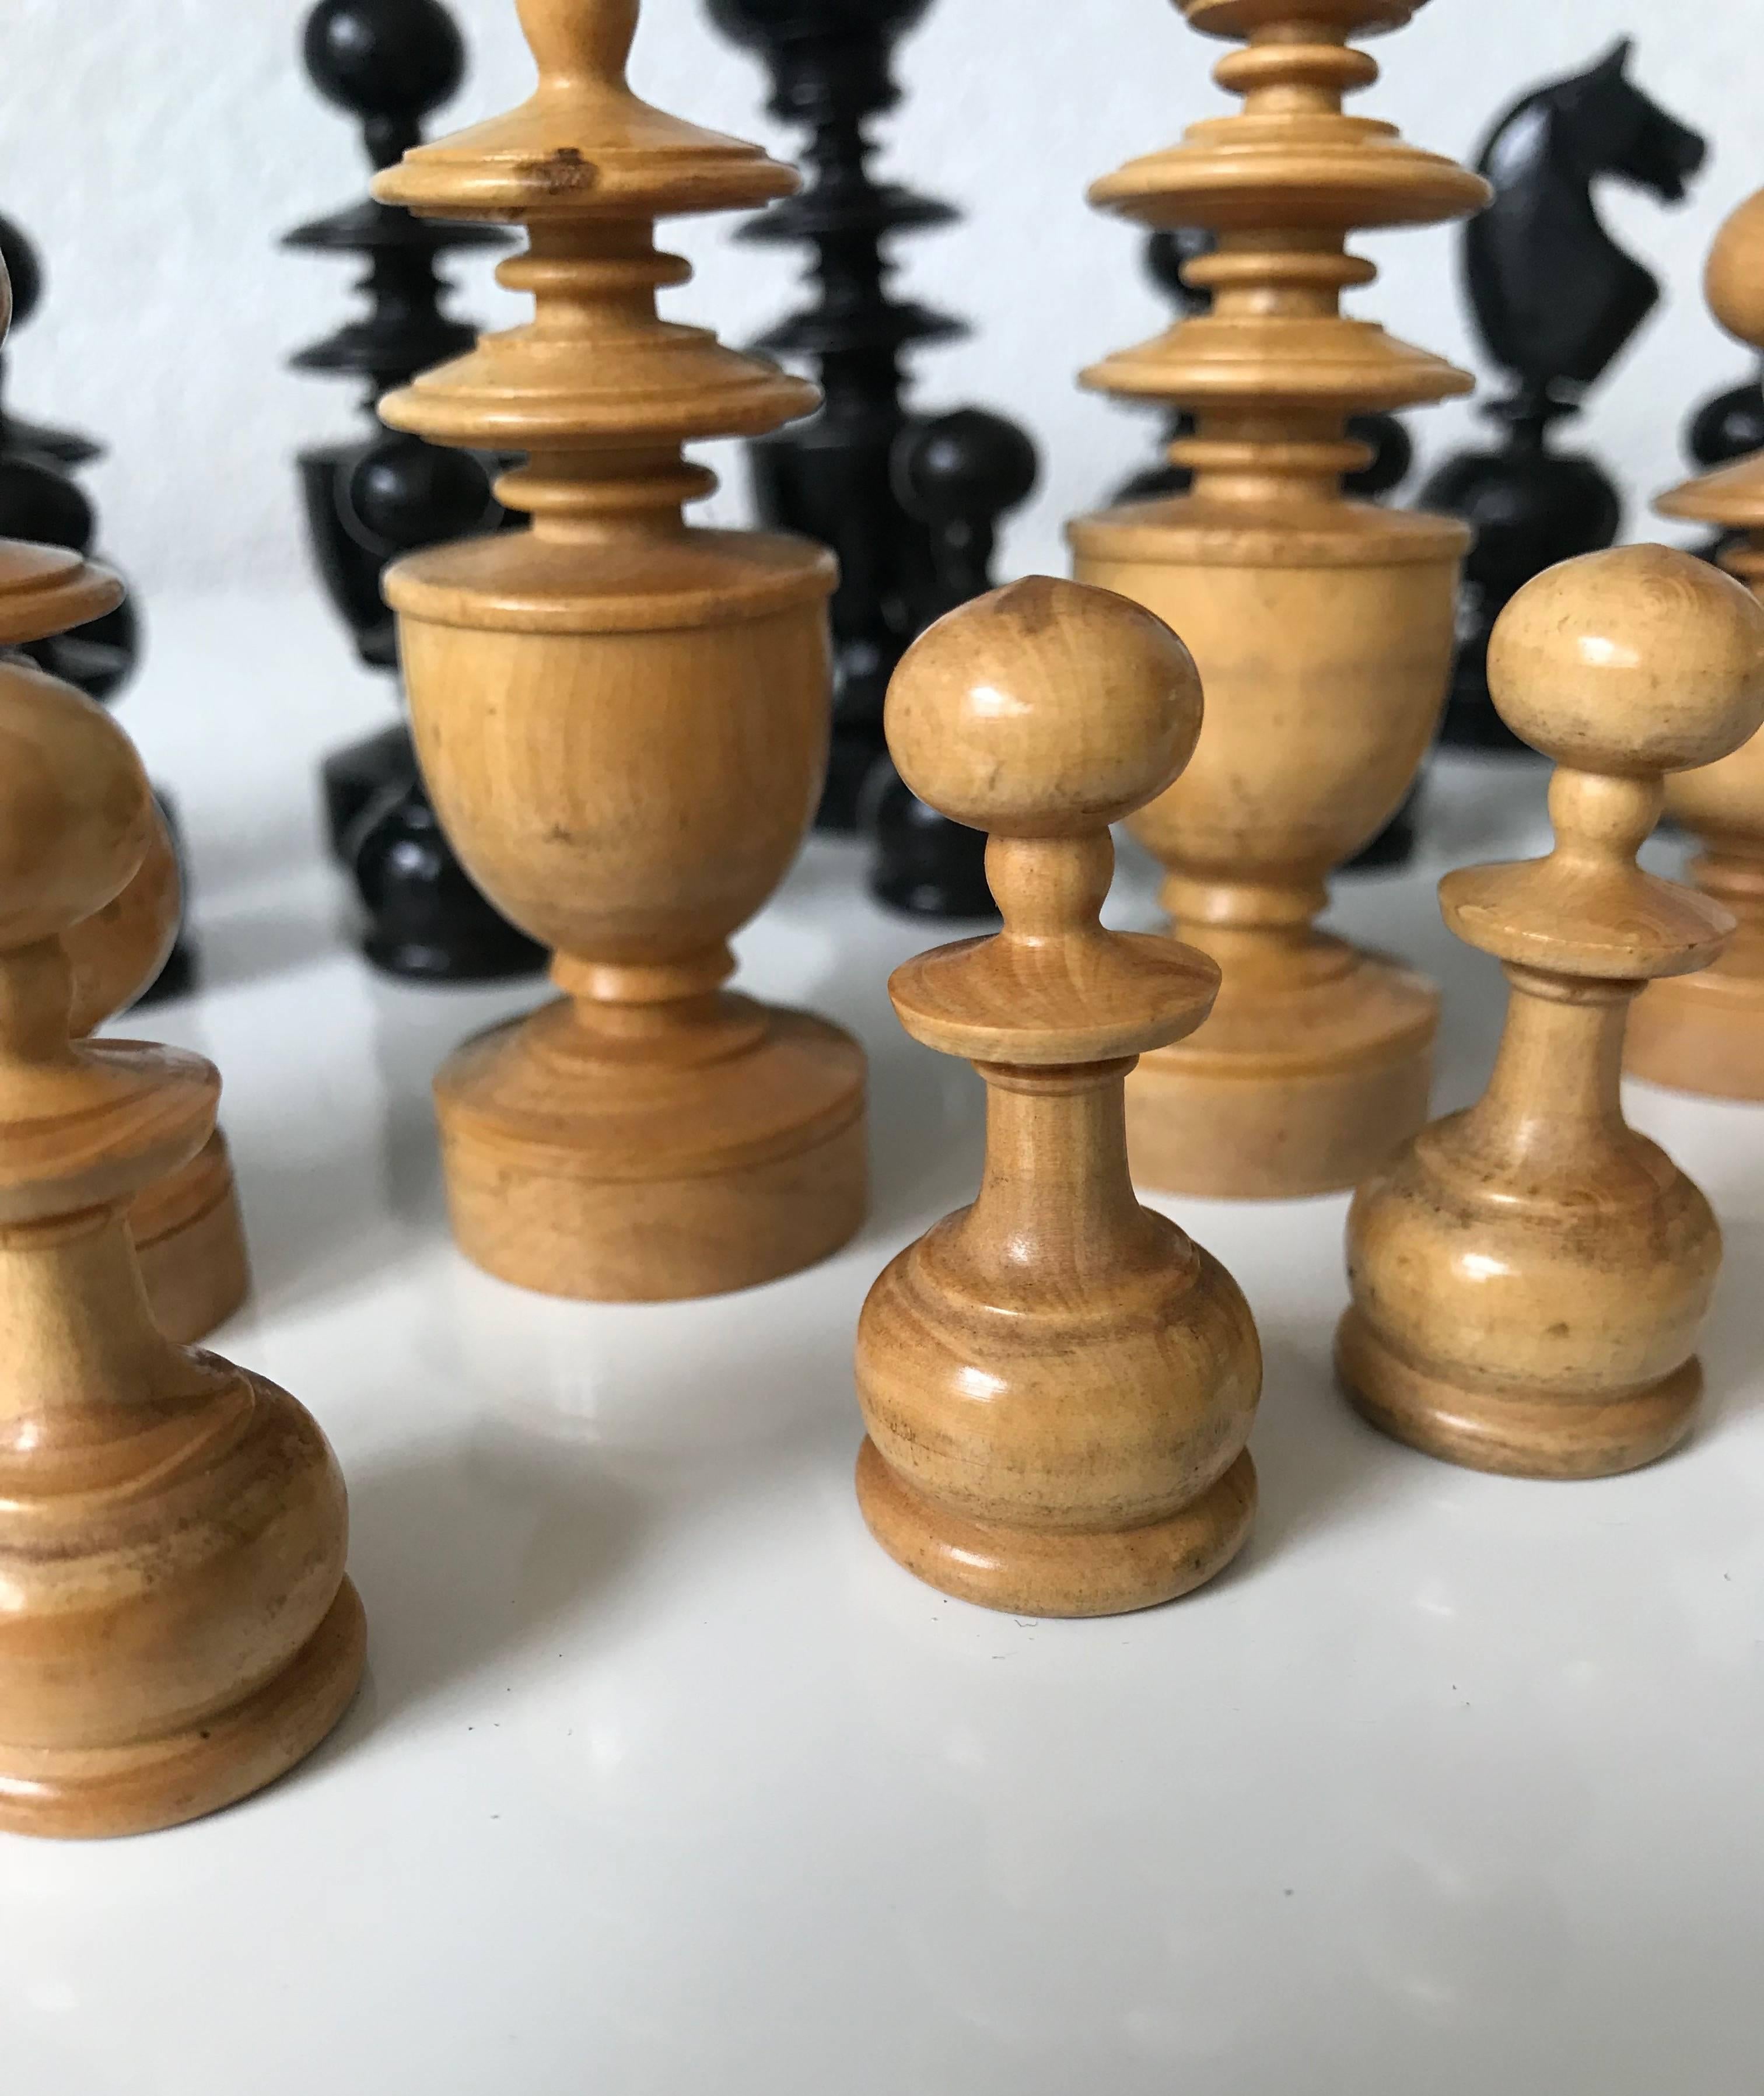 Good size, complete and stylish chess pieces. 

For the lovers of the game of chess we present these handcrafted pieces from the early 20th century. The classical manner in which these pieces are designed and executed is a joy to look at. The size